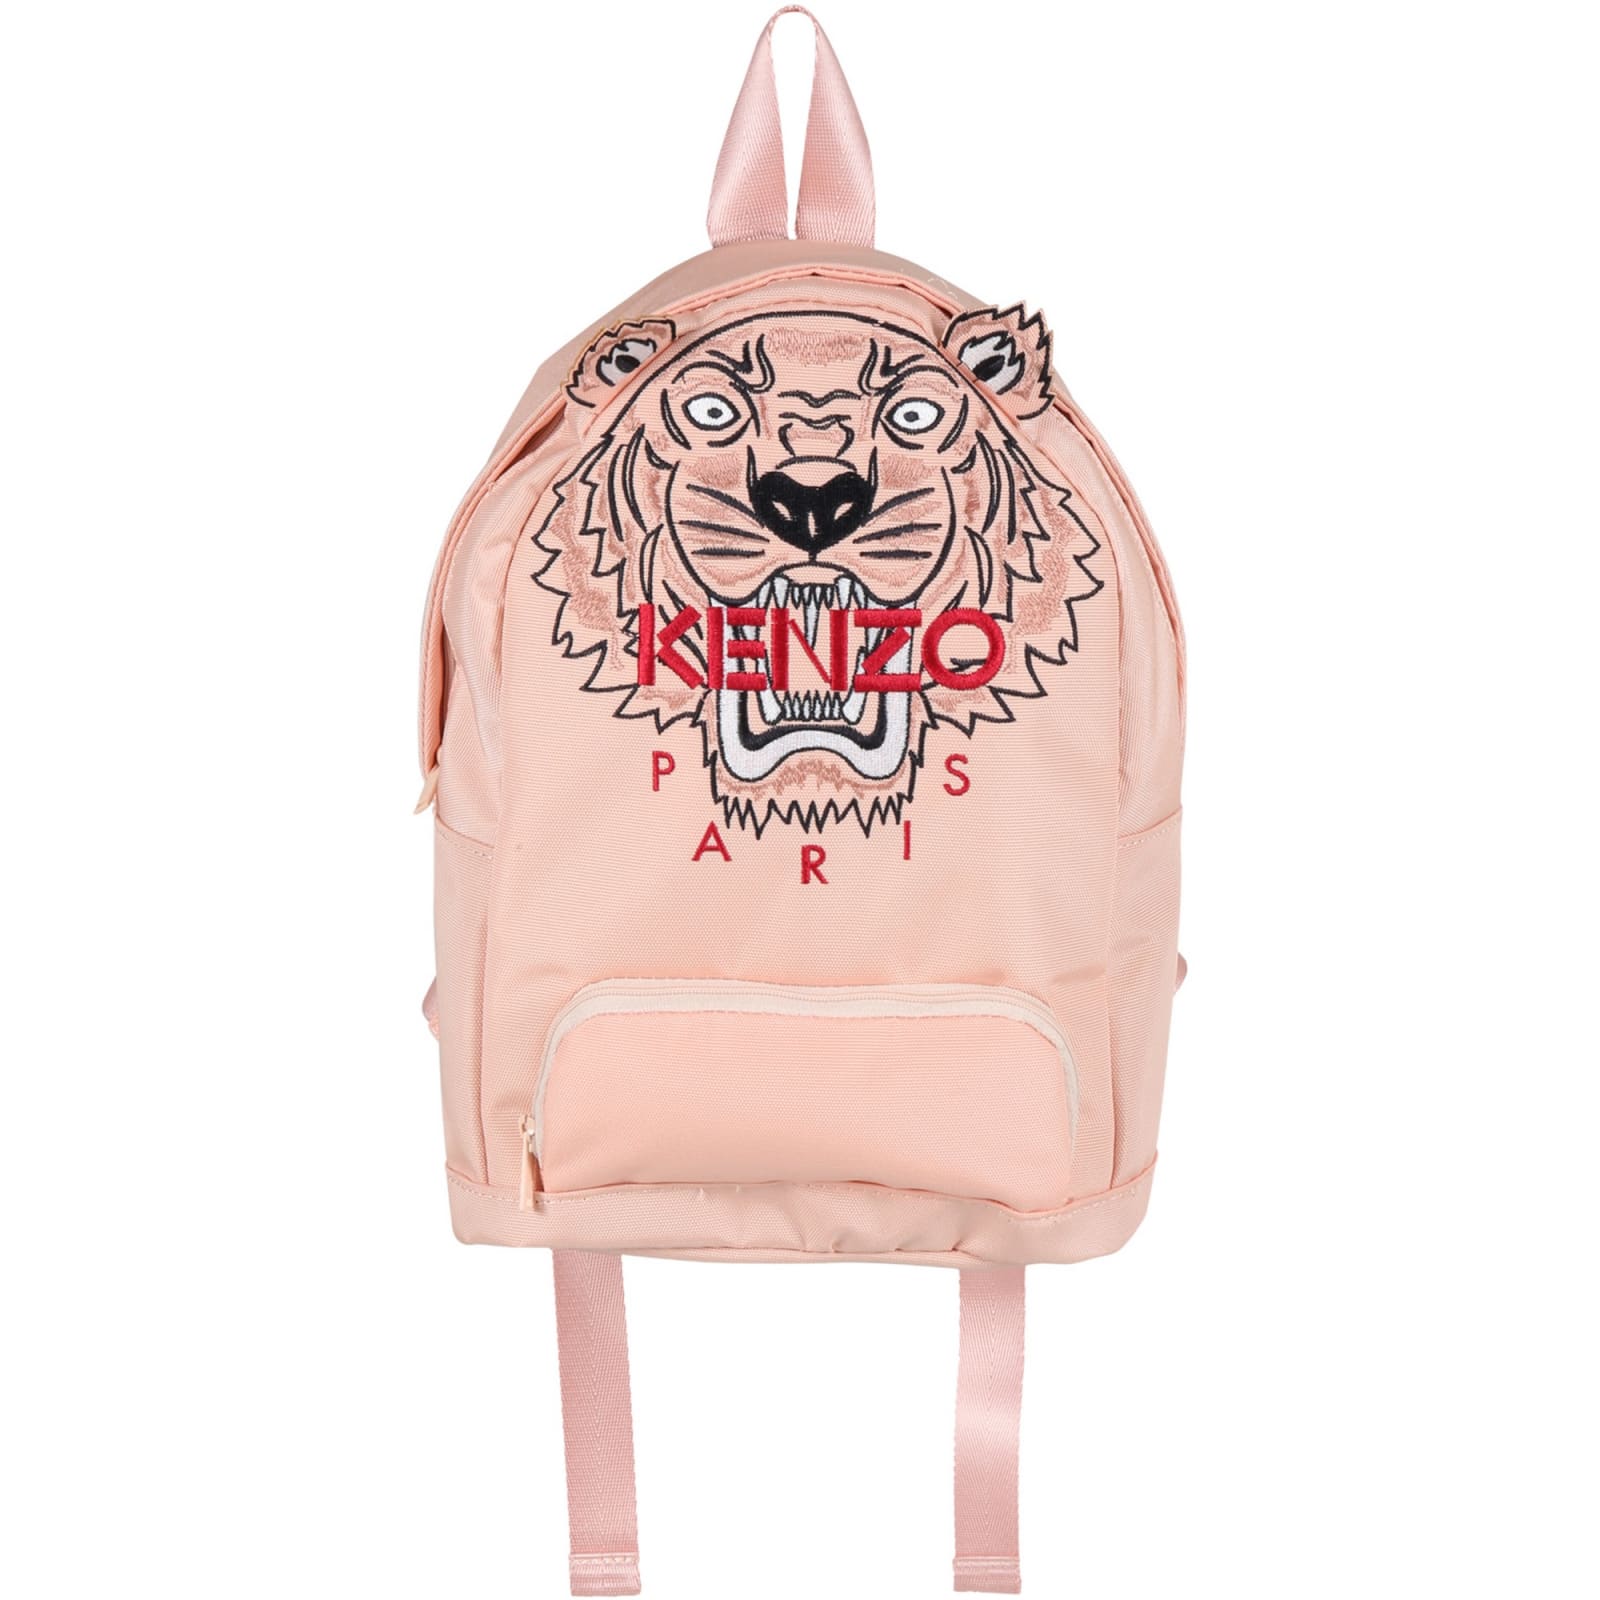 Kenzo Kids Pink Backpack For Girl With Tiger